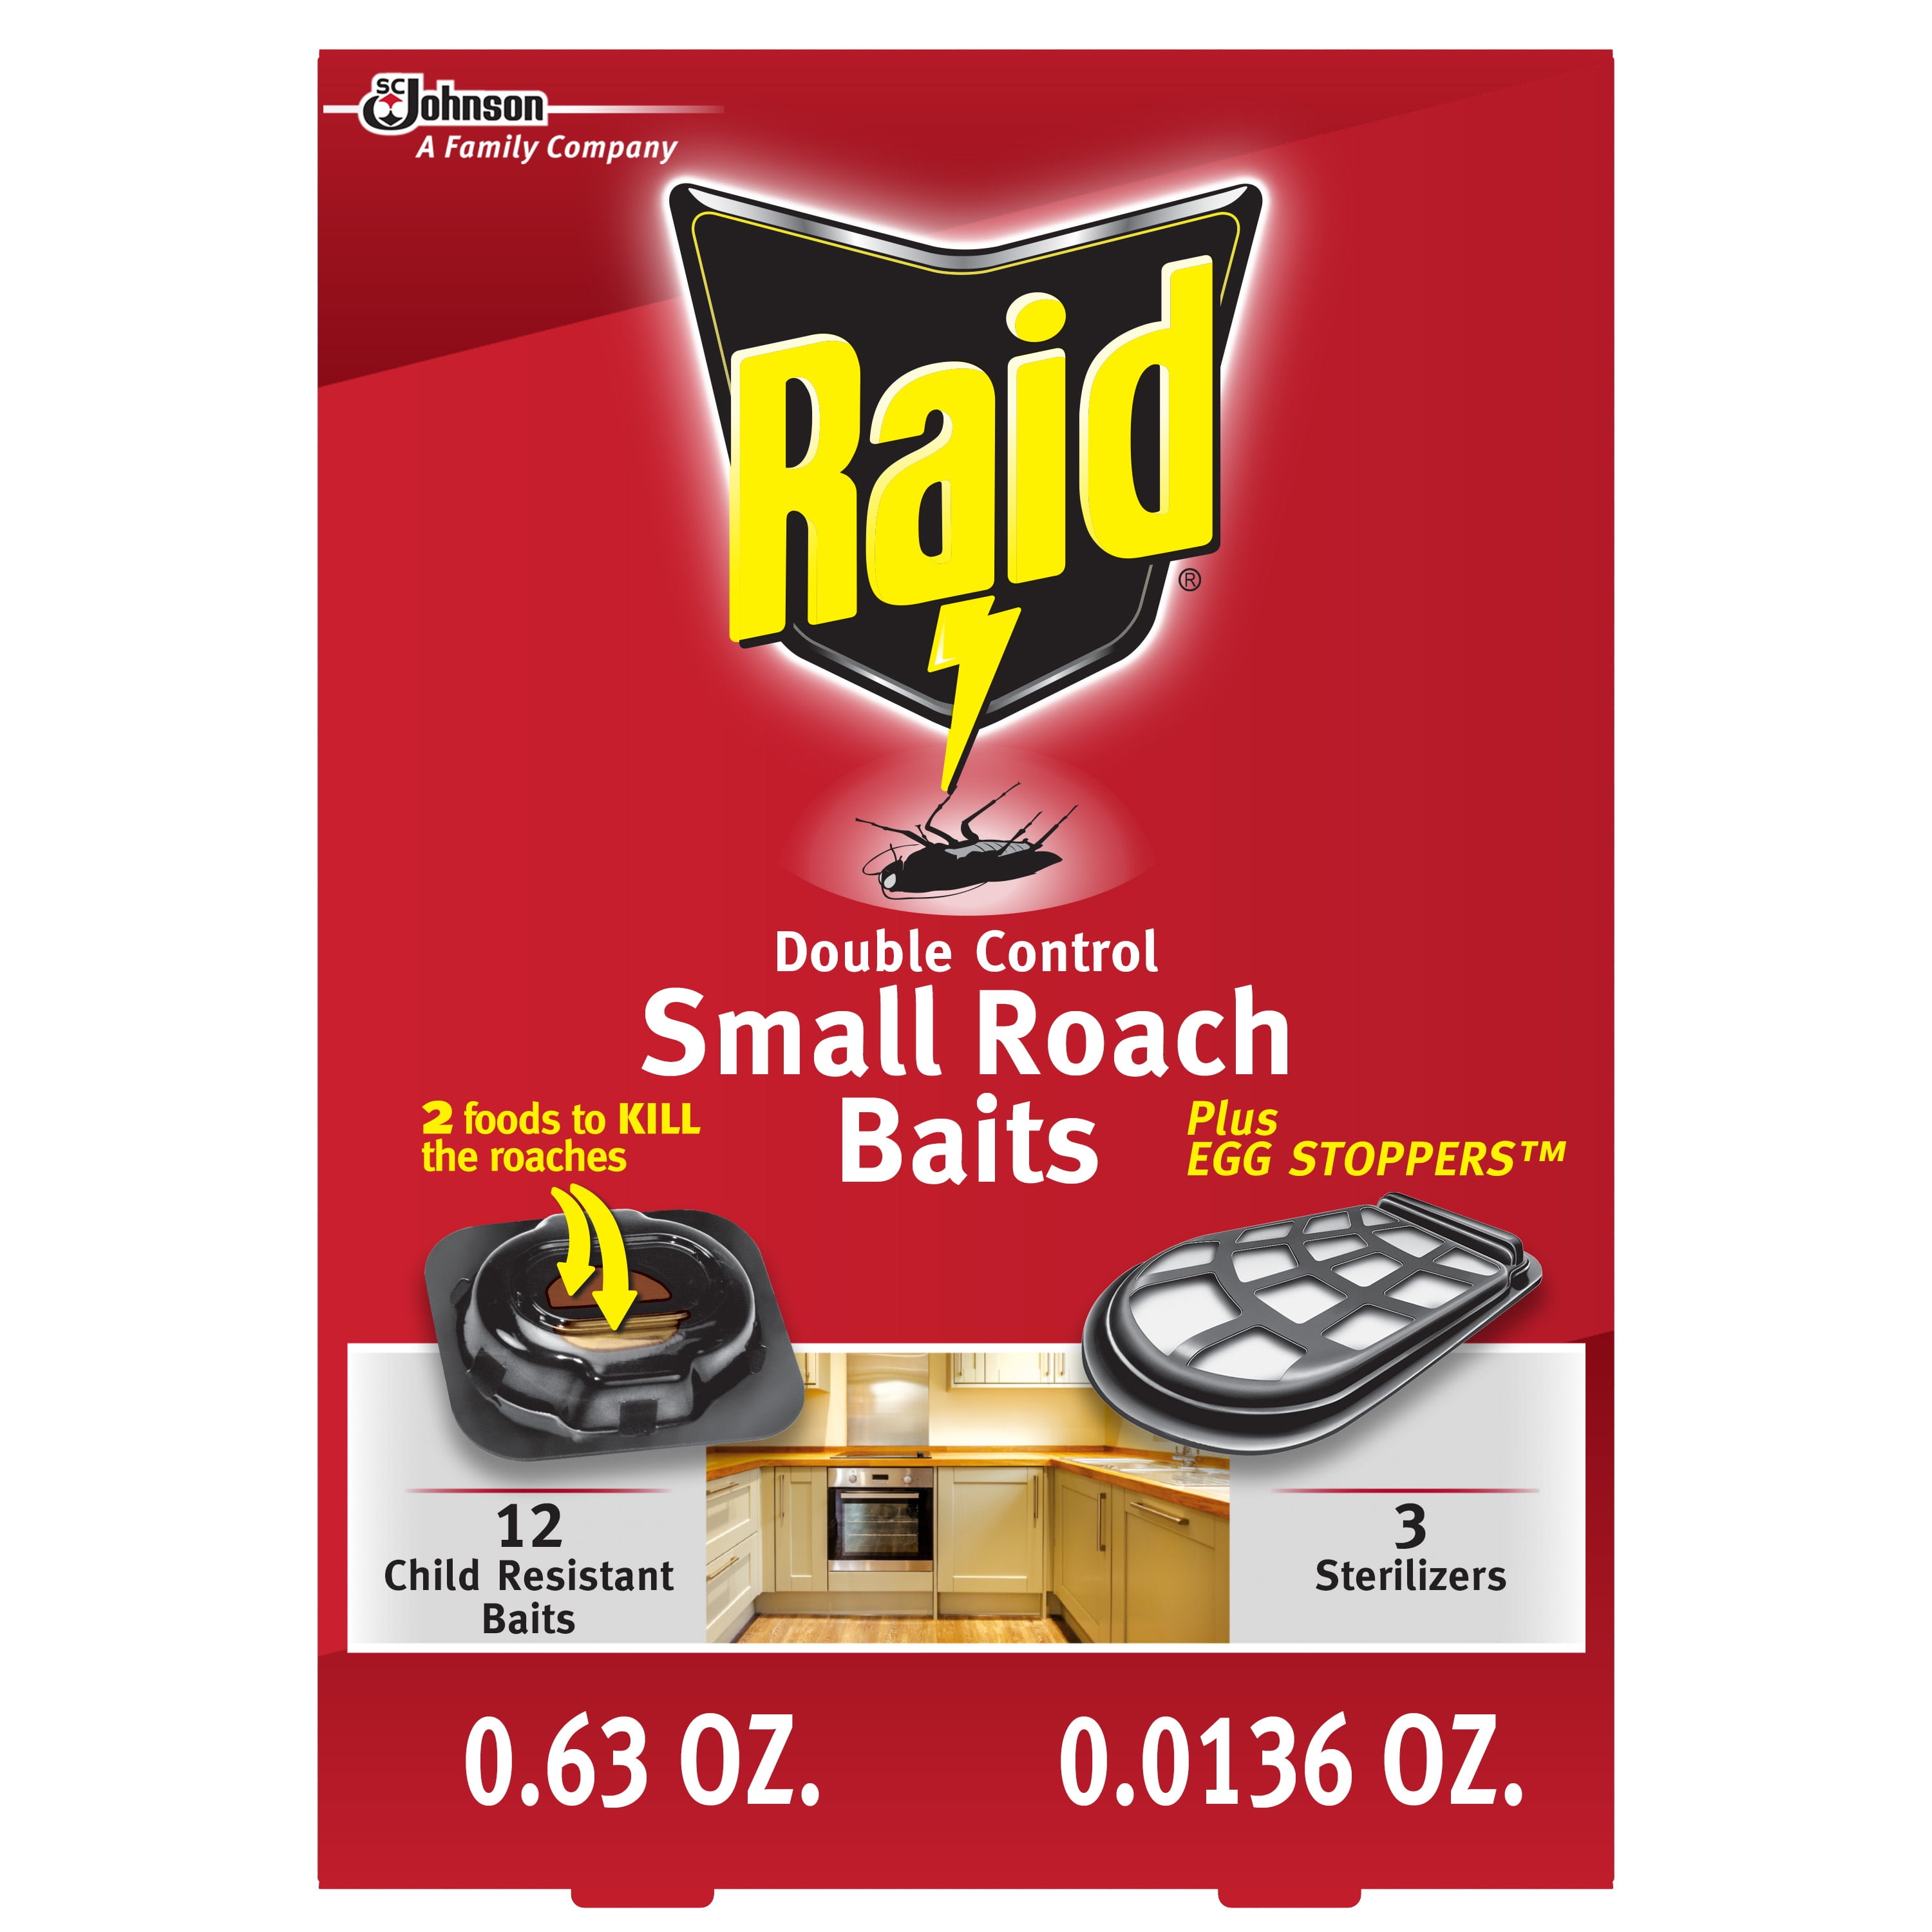 Raid Double Control Small Roach Baits Plus Egg Stoppers, 12 ct + 3 ct